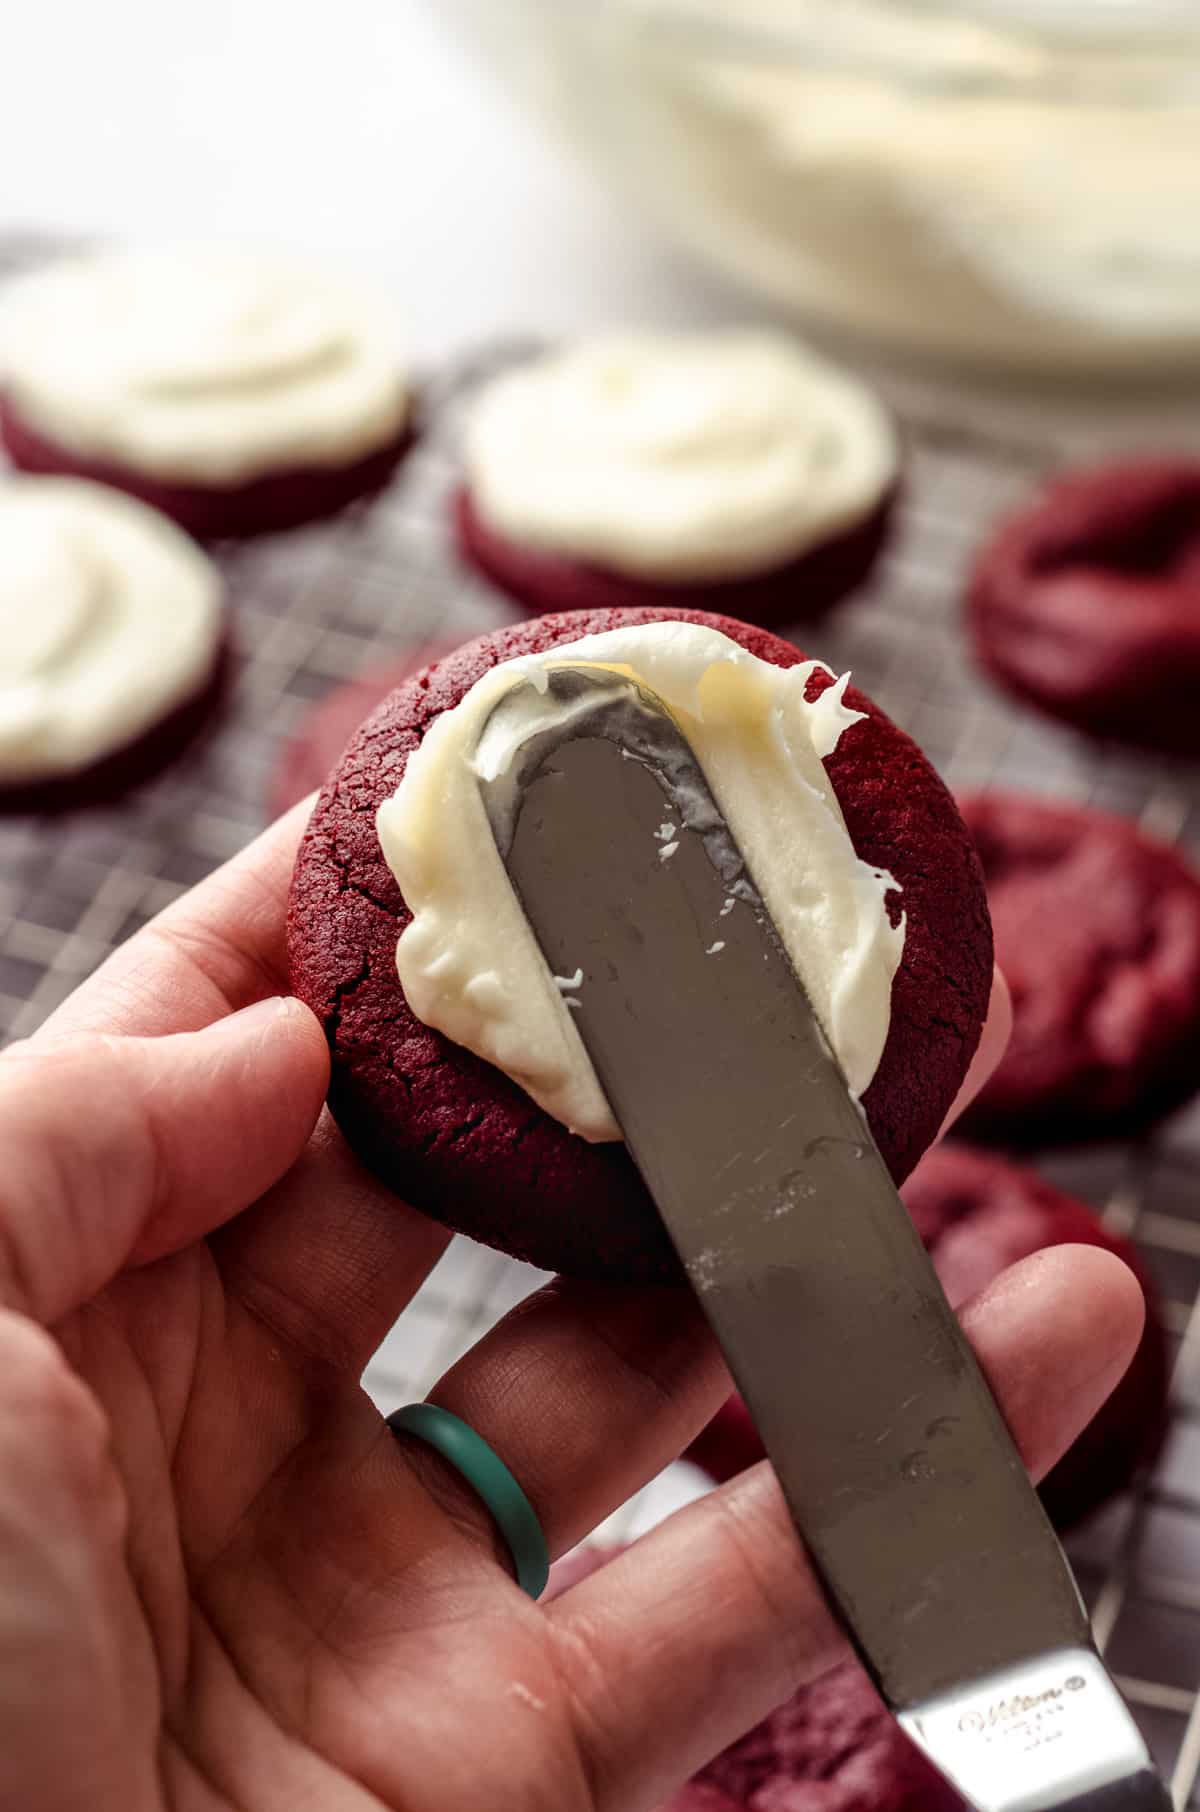 Someone is holding a red velvet cookie and, using a knife, is smearing it with cream cheese frosting.